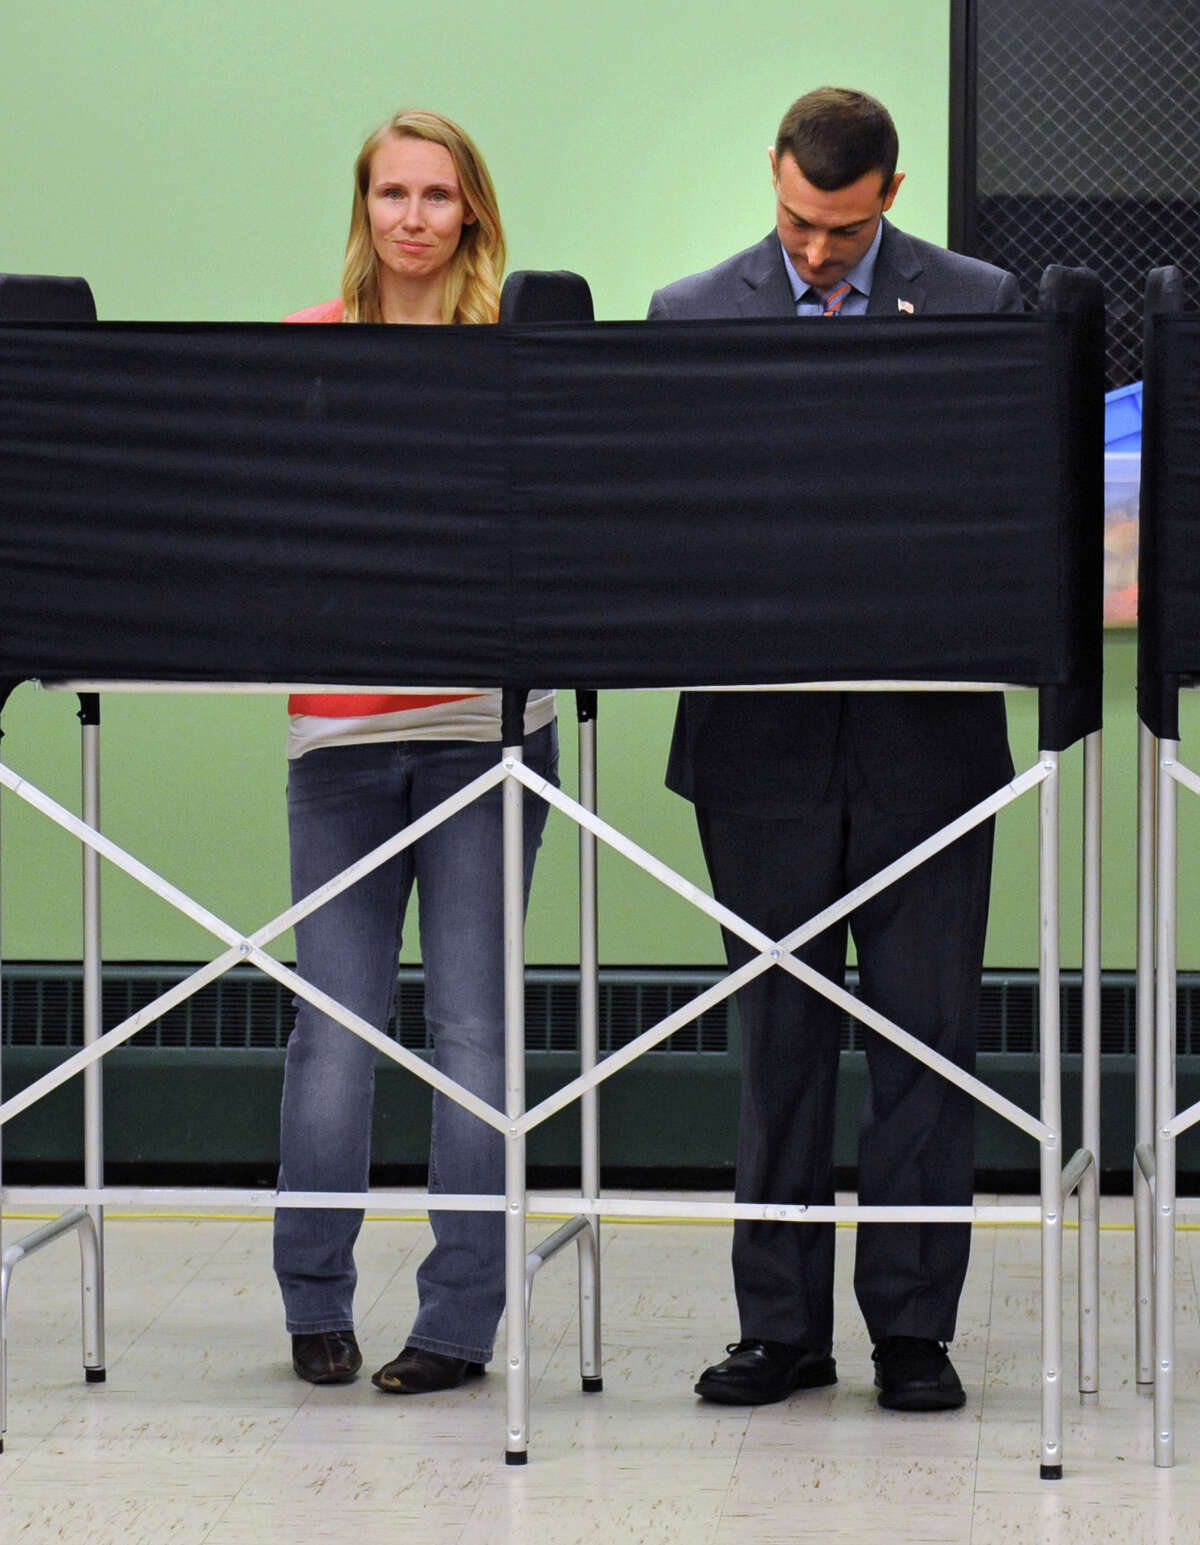 Jim Gordon and his wife Melissa vote at the Lansingburgh Boys and Girls Club on Tuesday, Nov. 3, 2015 in Troy, N.Y. Jim, a Republican on the City Council, was running for Troy mayor. In November, he won a seat on the North Greenbush Town Board. (Lori Van Buren / Times Union)